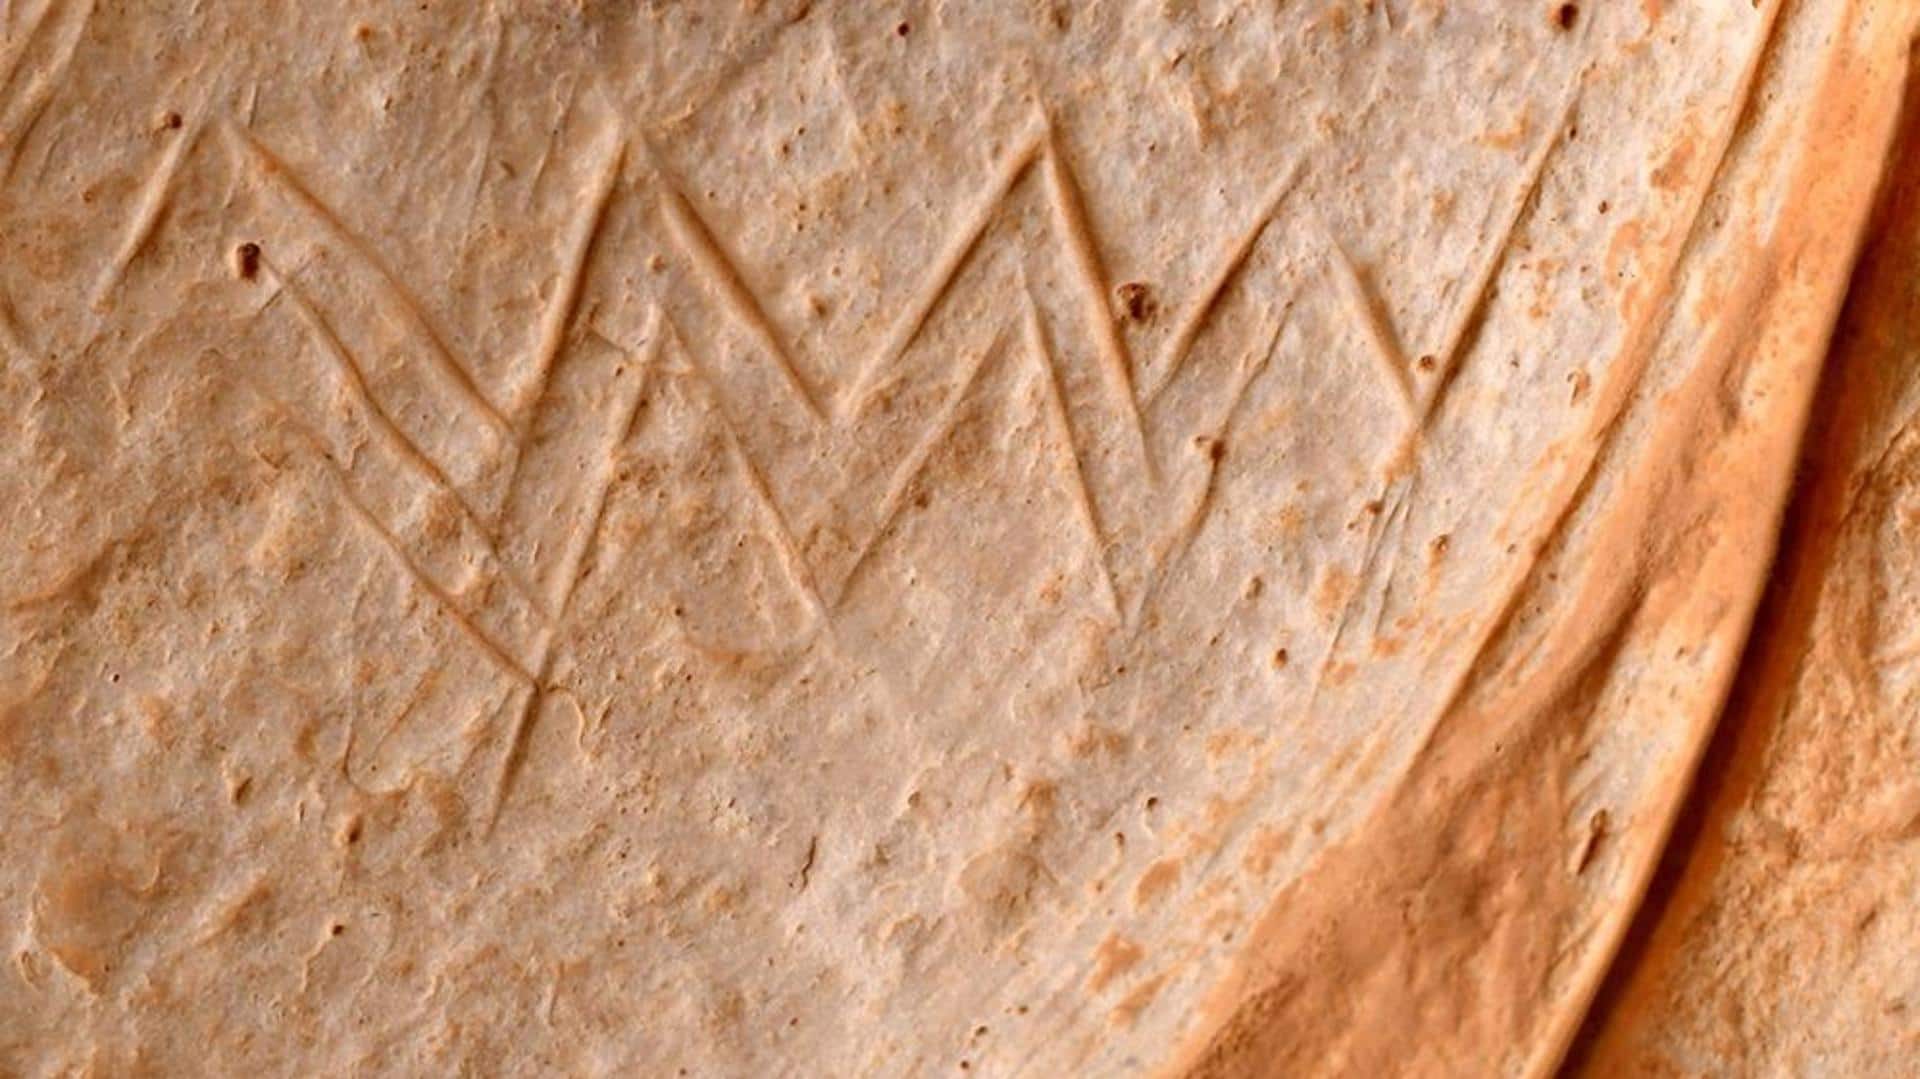 These 8,000-year-old stone engravings may be the world's oldest 'blueprints'